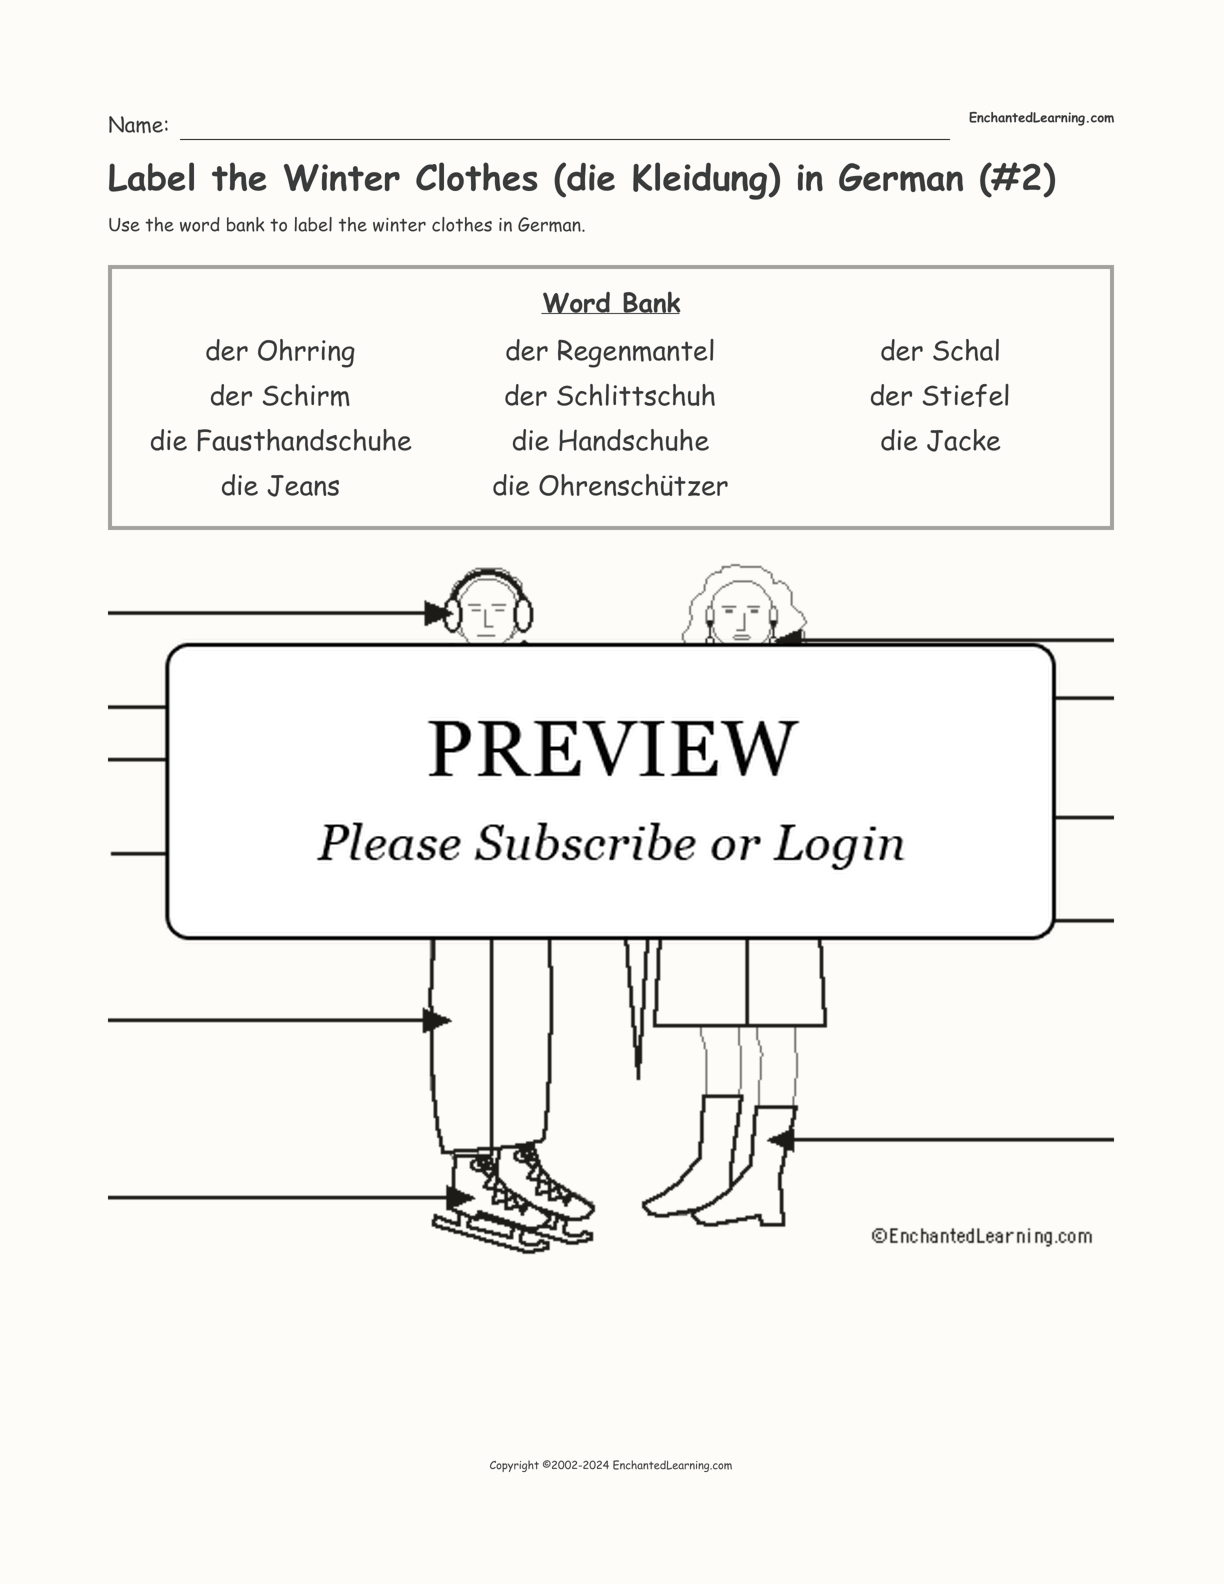 Label the Winter Clothes (die Kleidung) in German (#2) interactive worksheet page 1